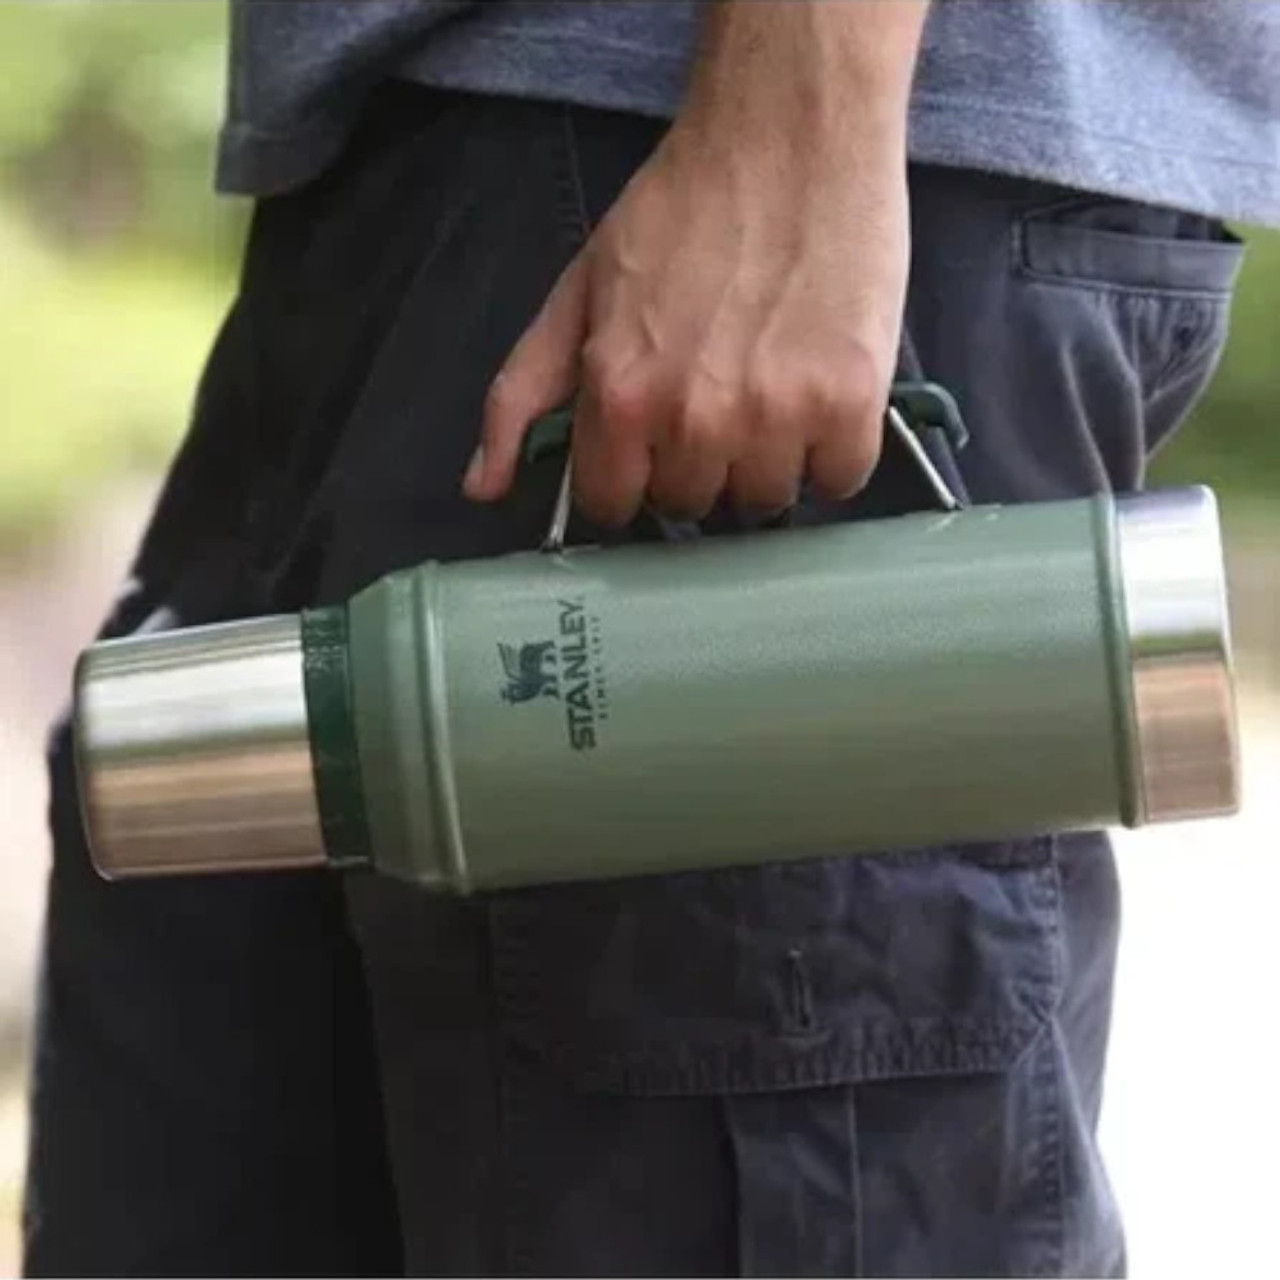 Stanley Thermos Test (UPDATED)